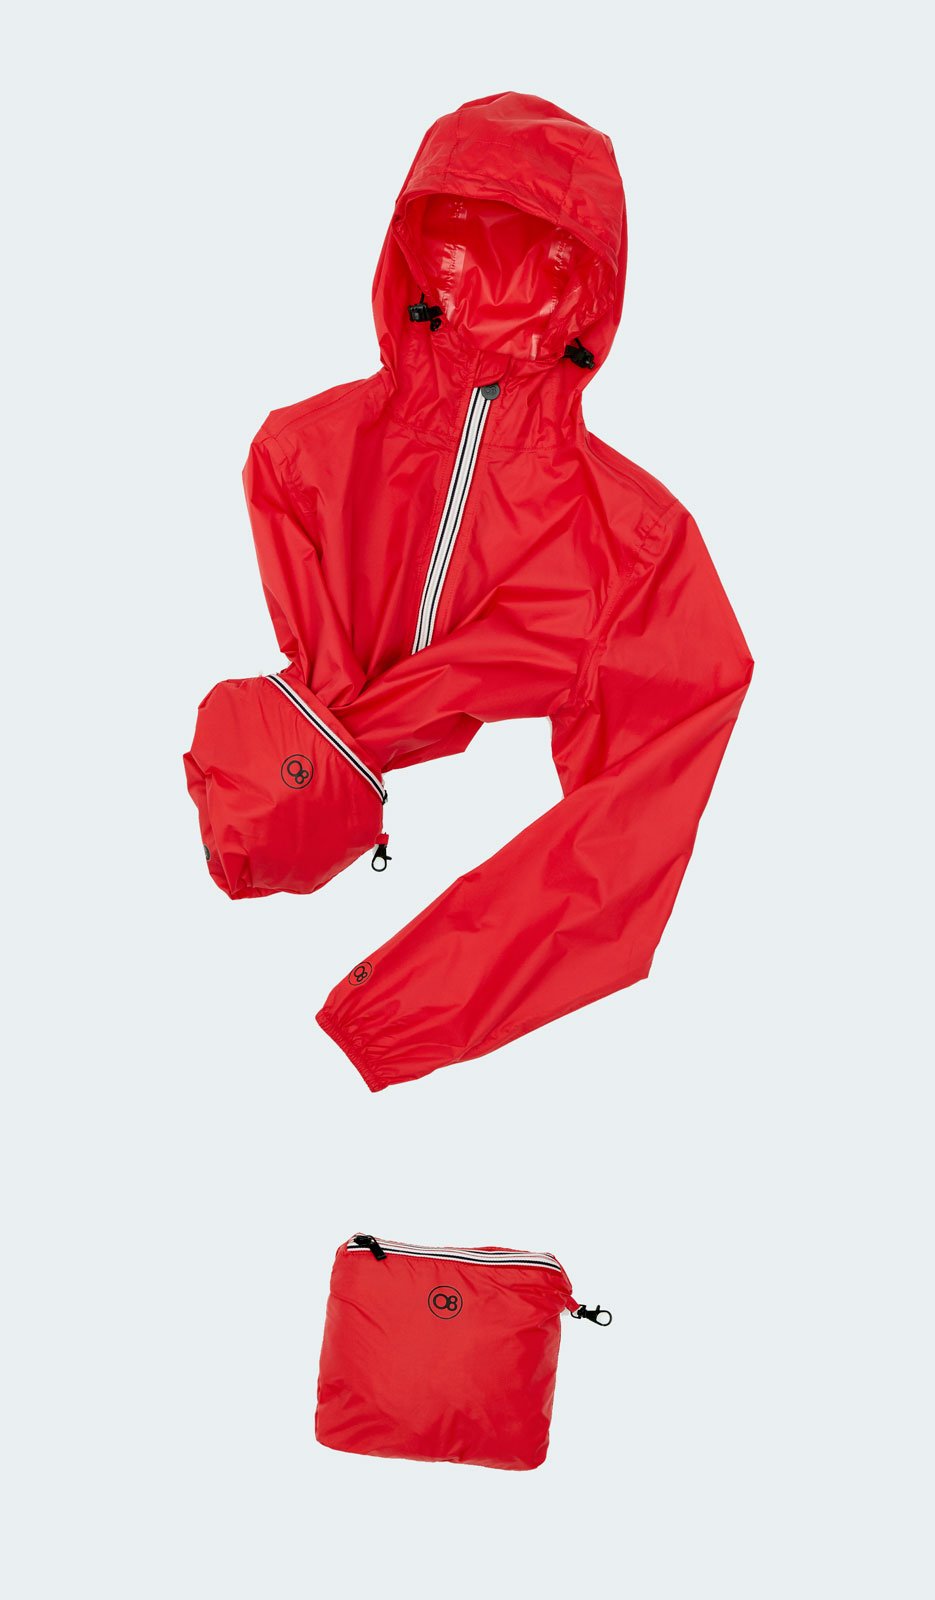 Picture of a Women's Quarter Zip White Waterproof Rain Jacket red version just to show how to pack the jacket into the bag